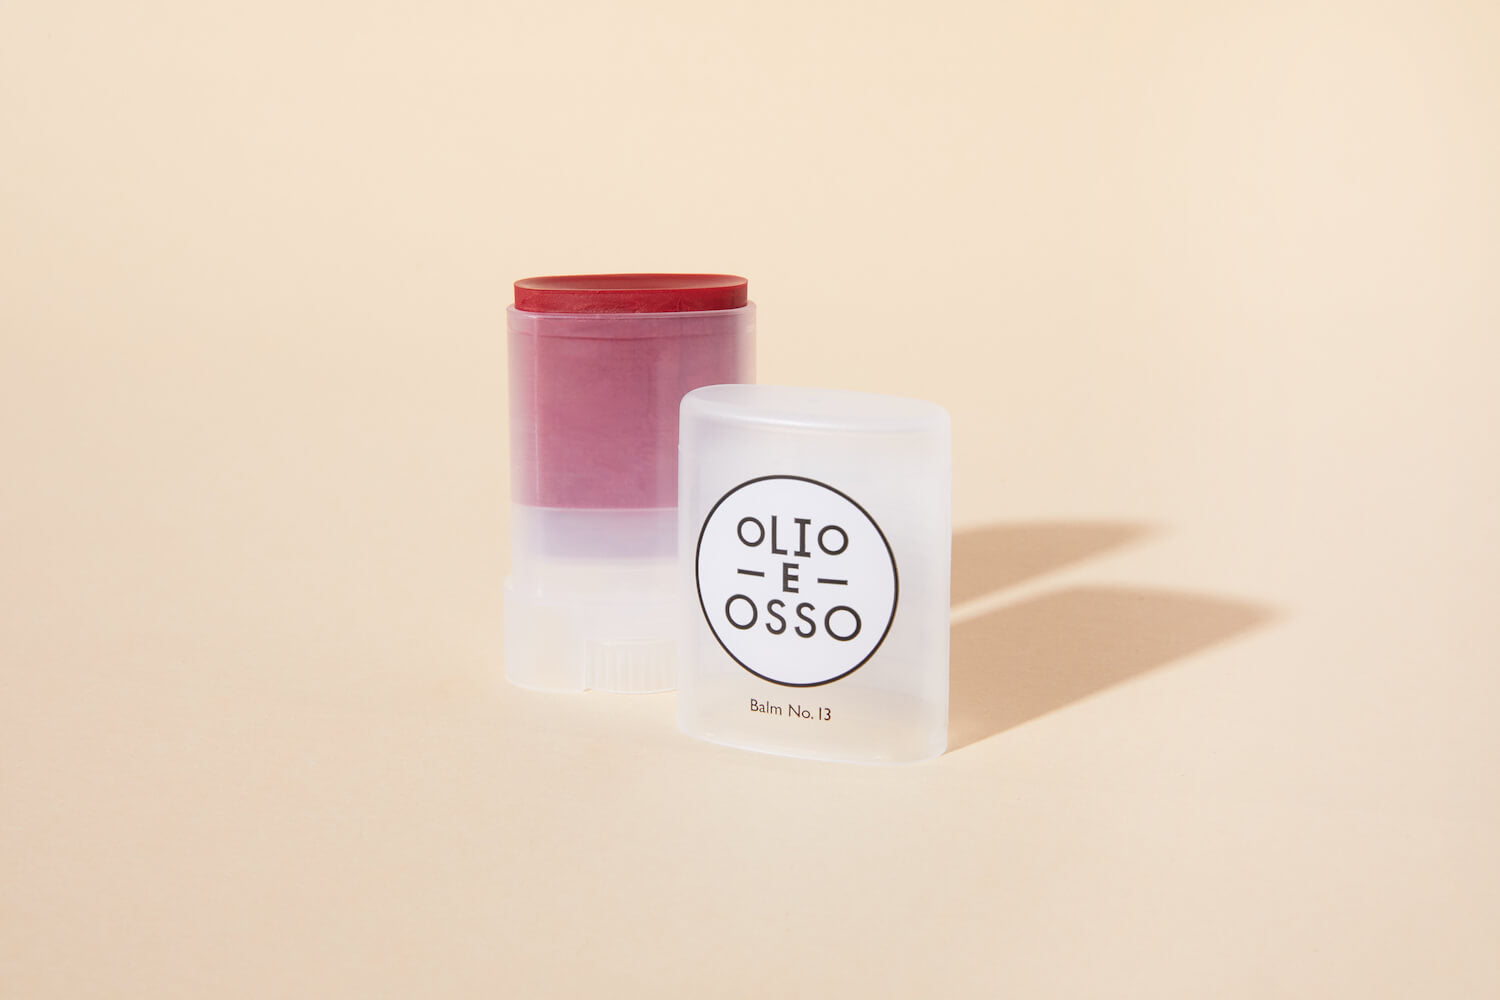 Functional beauty at its finest, Olio E Osso balms nourish lips and cheeks while providing the perfect touch of color.